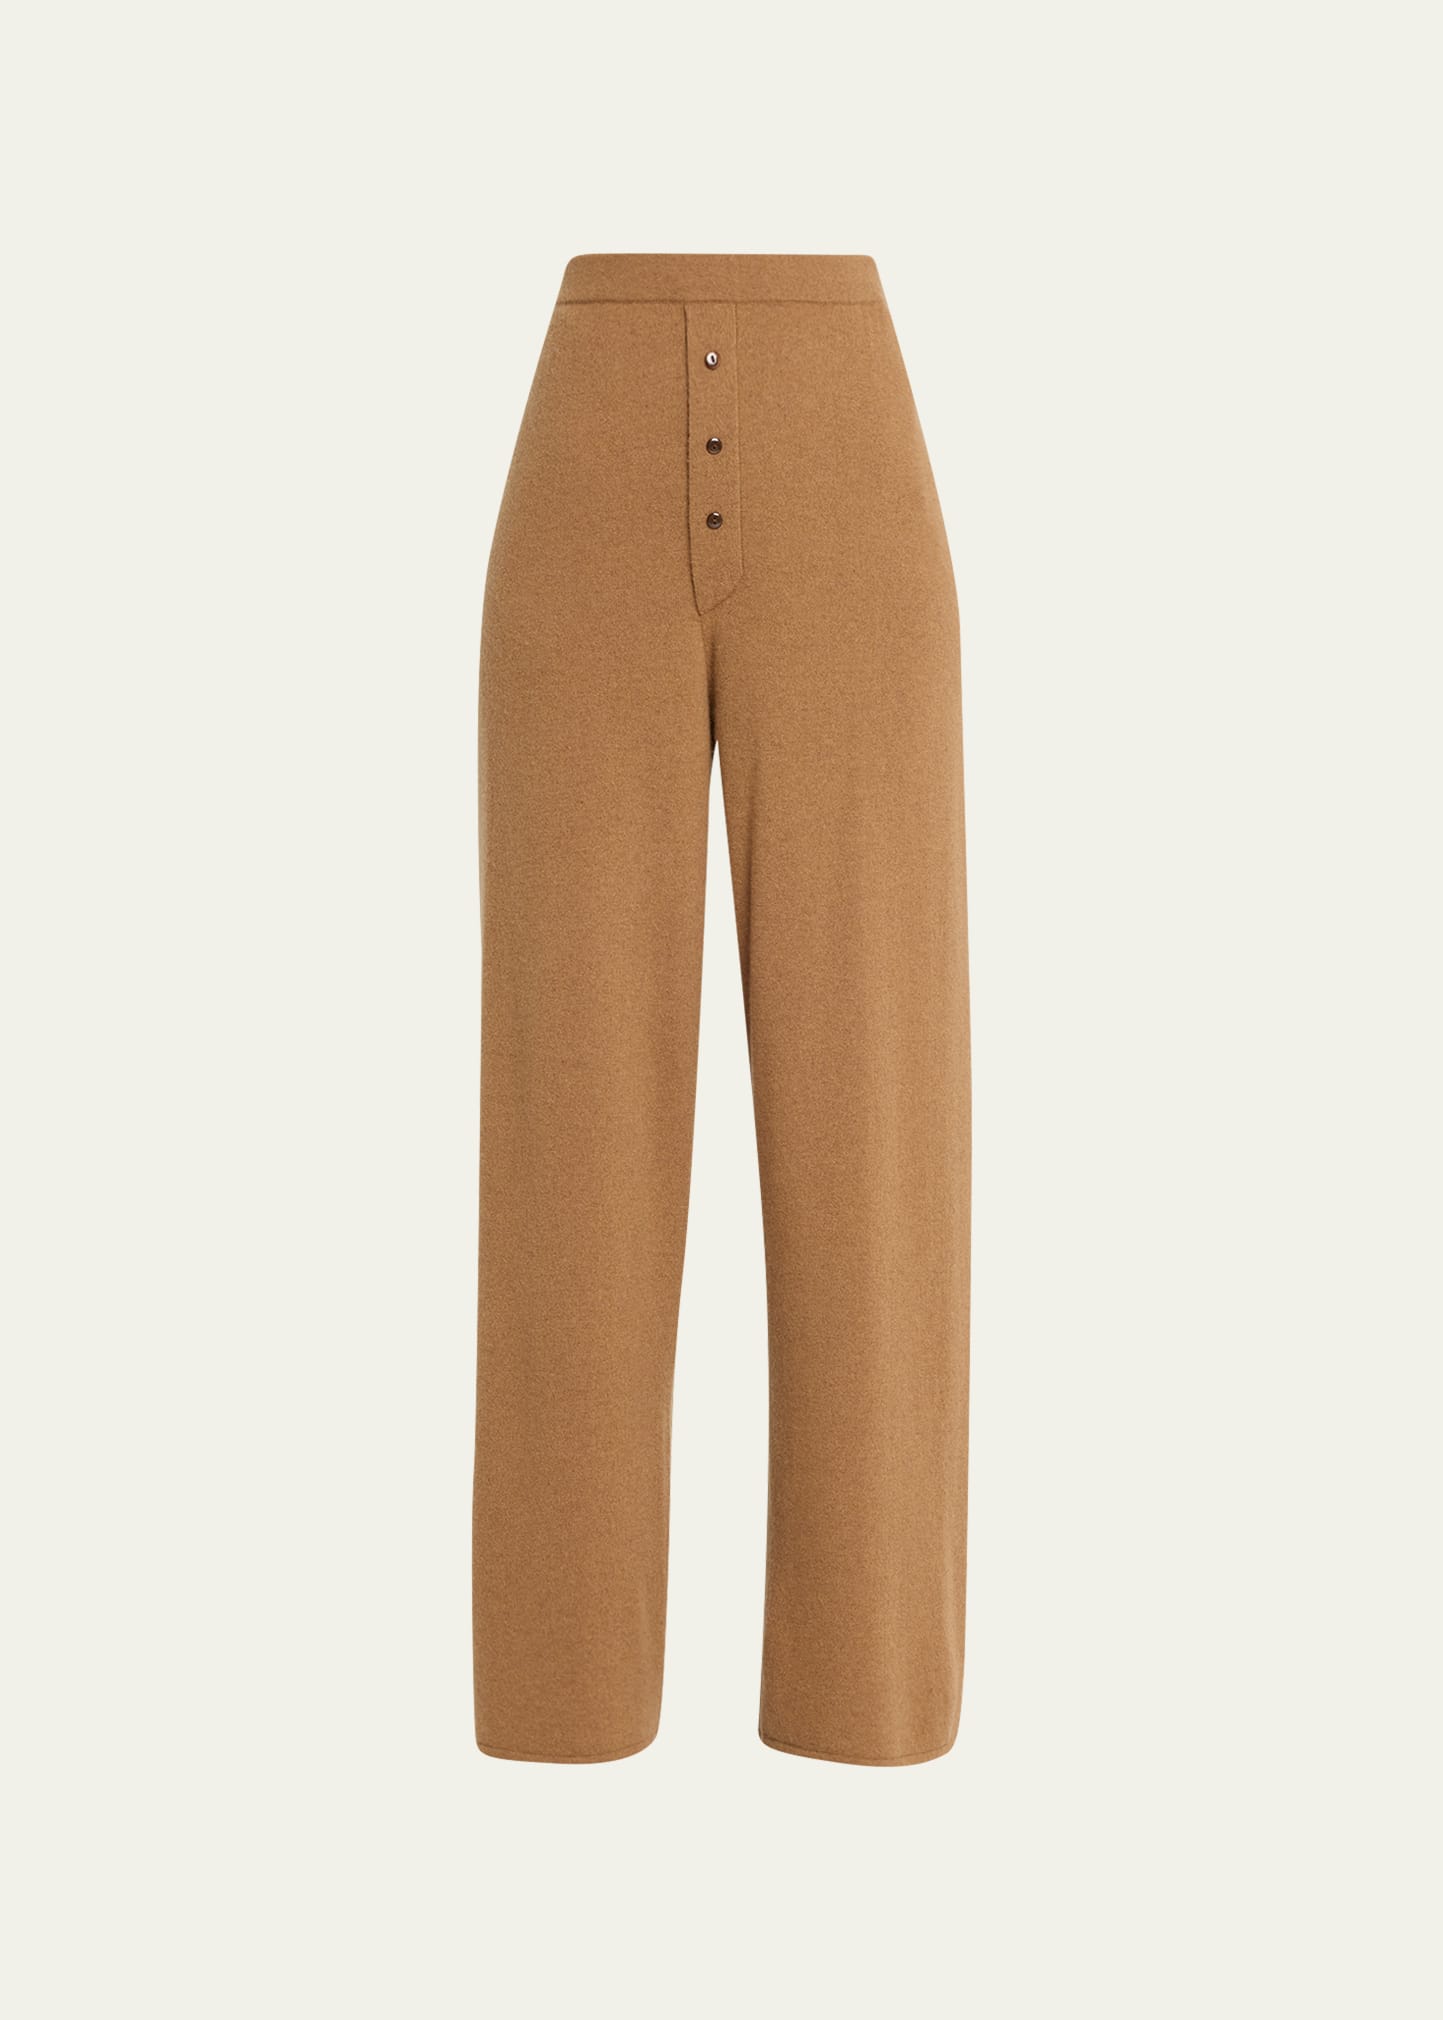 GUEST IN RESIDENCE EVERYWEAR CASHMERE KNIT RELAXED PANTS